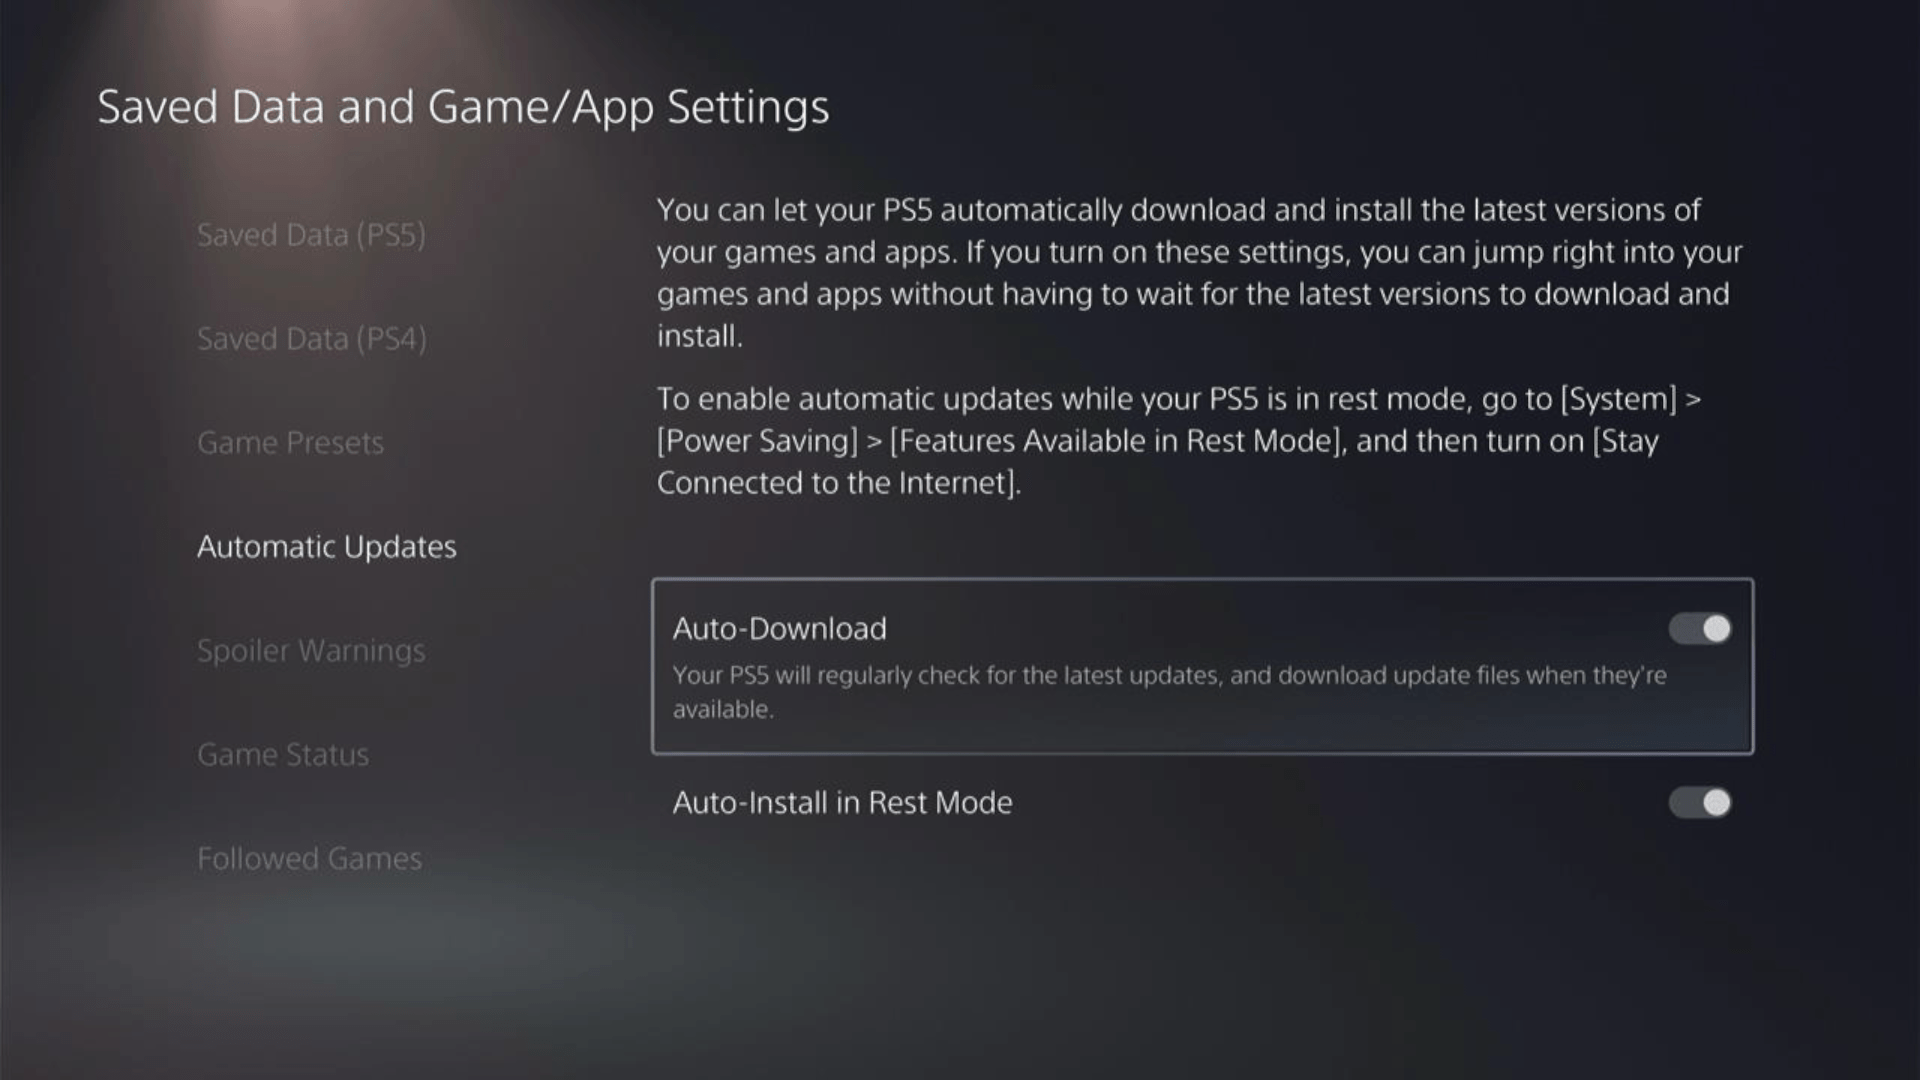 In the Saved Data and Game/App Settings window, select Automatic Updates from the left sidebar to enable automatic game updates to avoid Network Error 2147811328